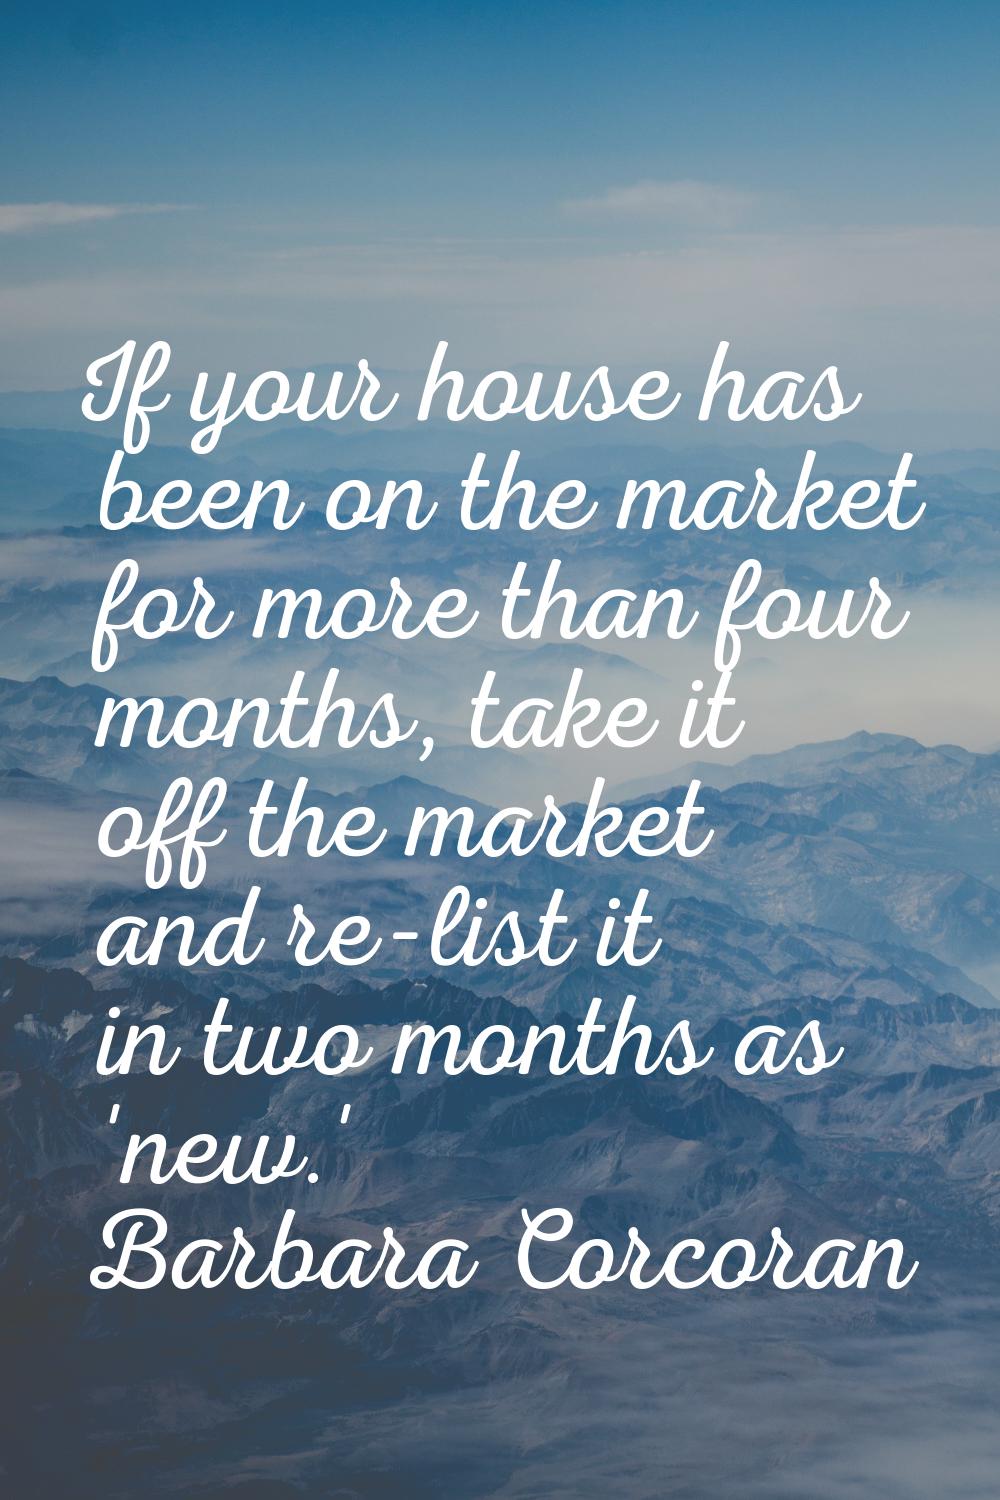 If your house has been on the market for more than four months, take it off the market and re-list 